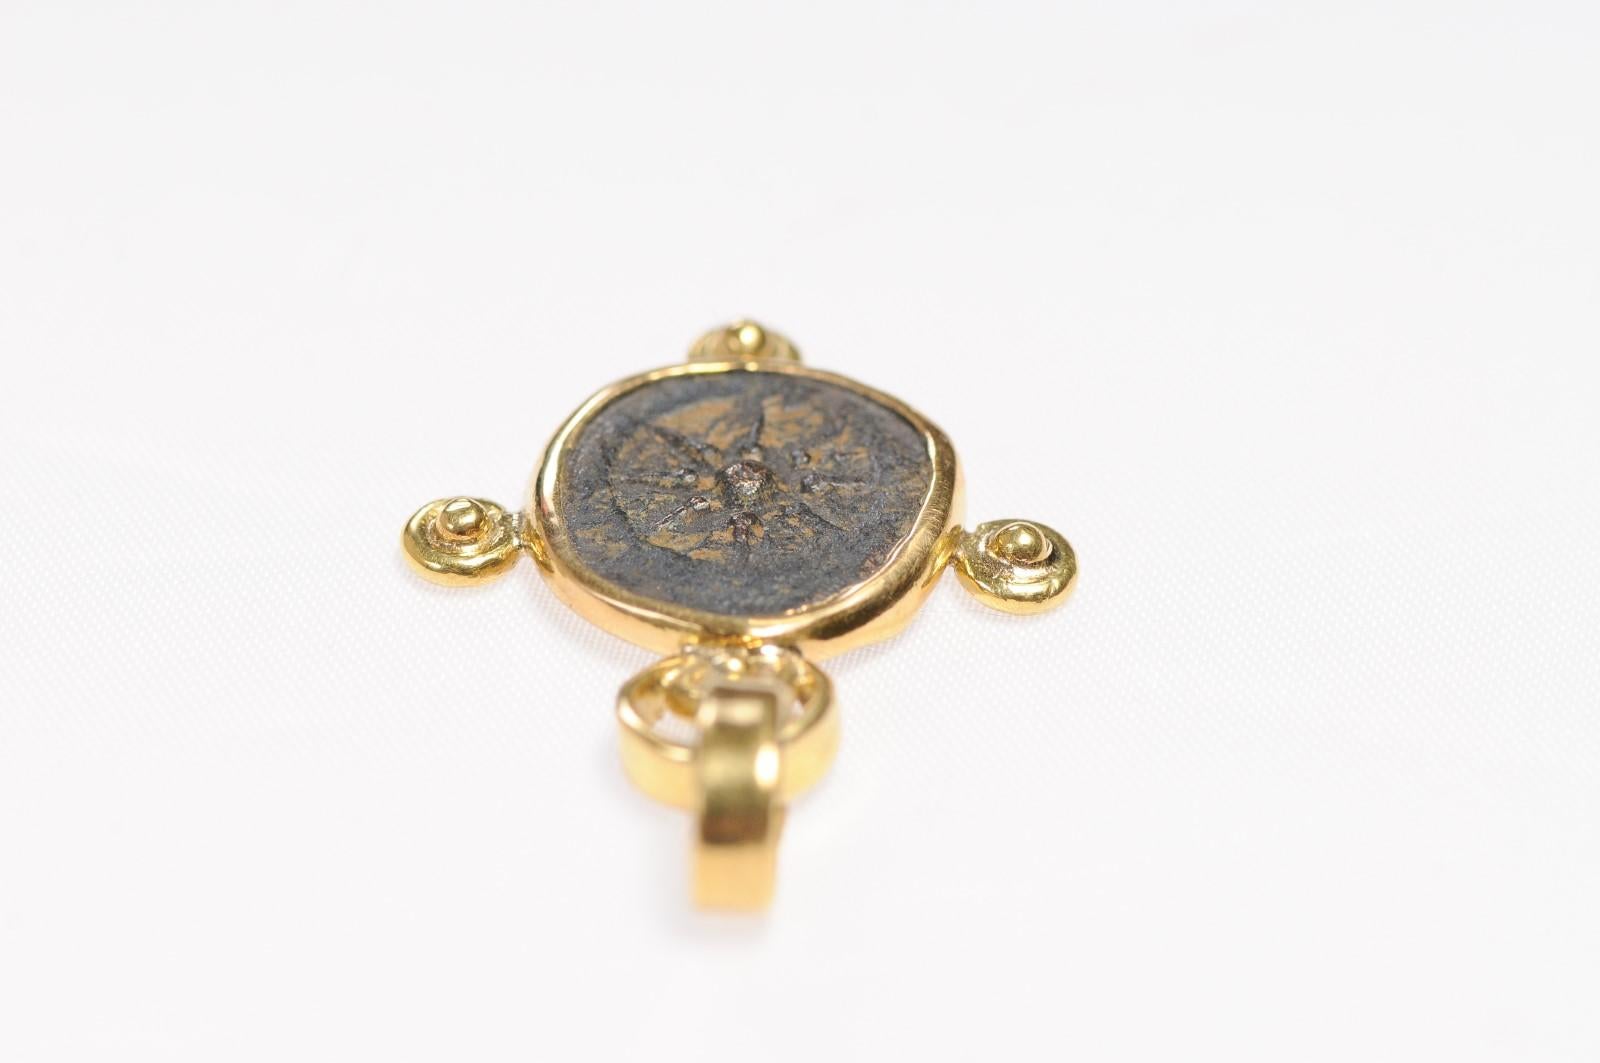 Roman Widow's Mite Coin, 22kt Gold Pendant (pendant only) For Sale 5